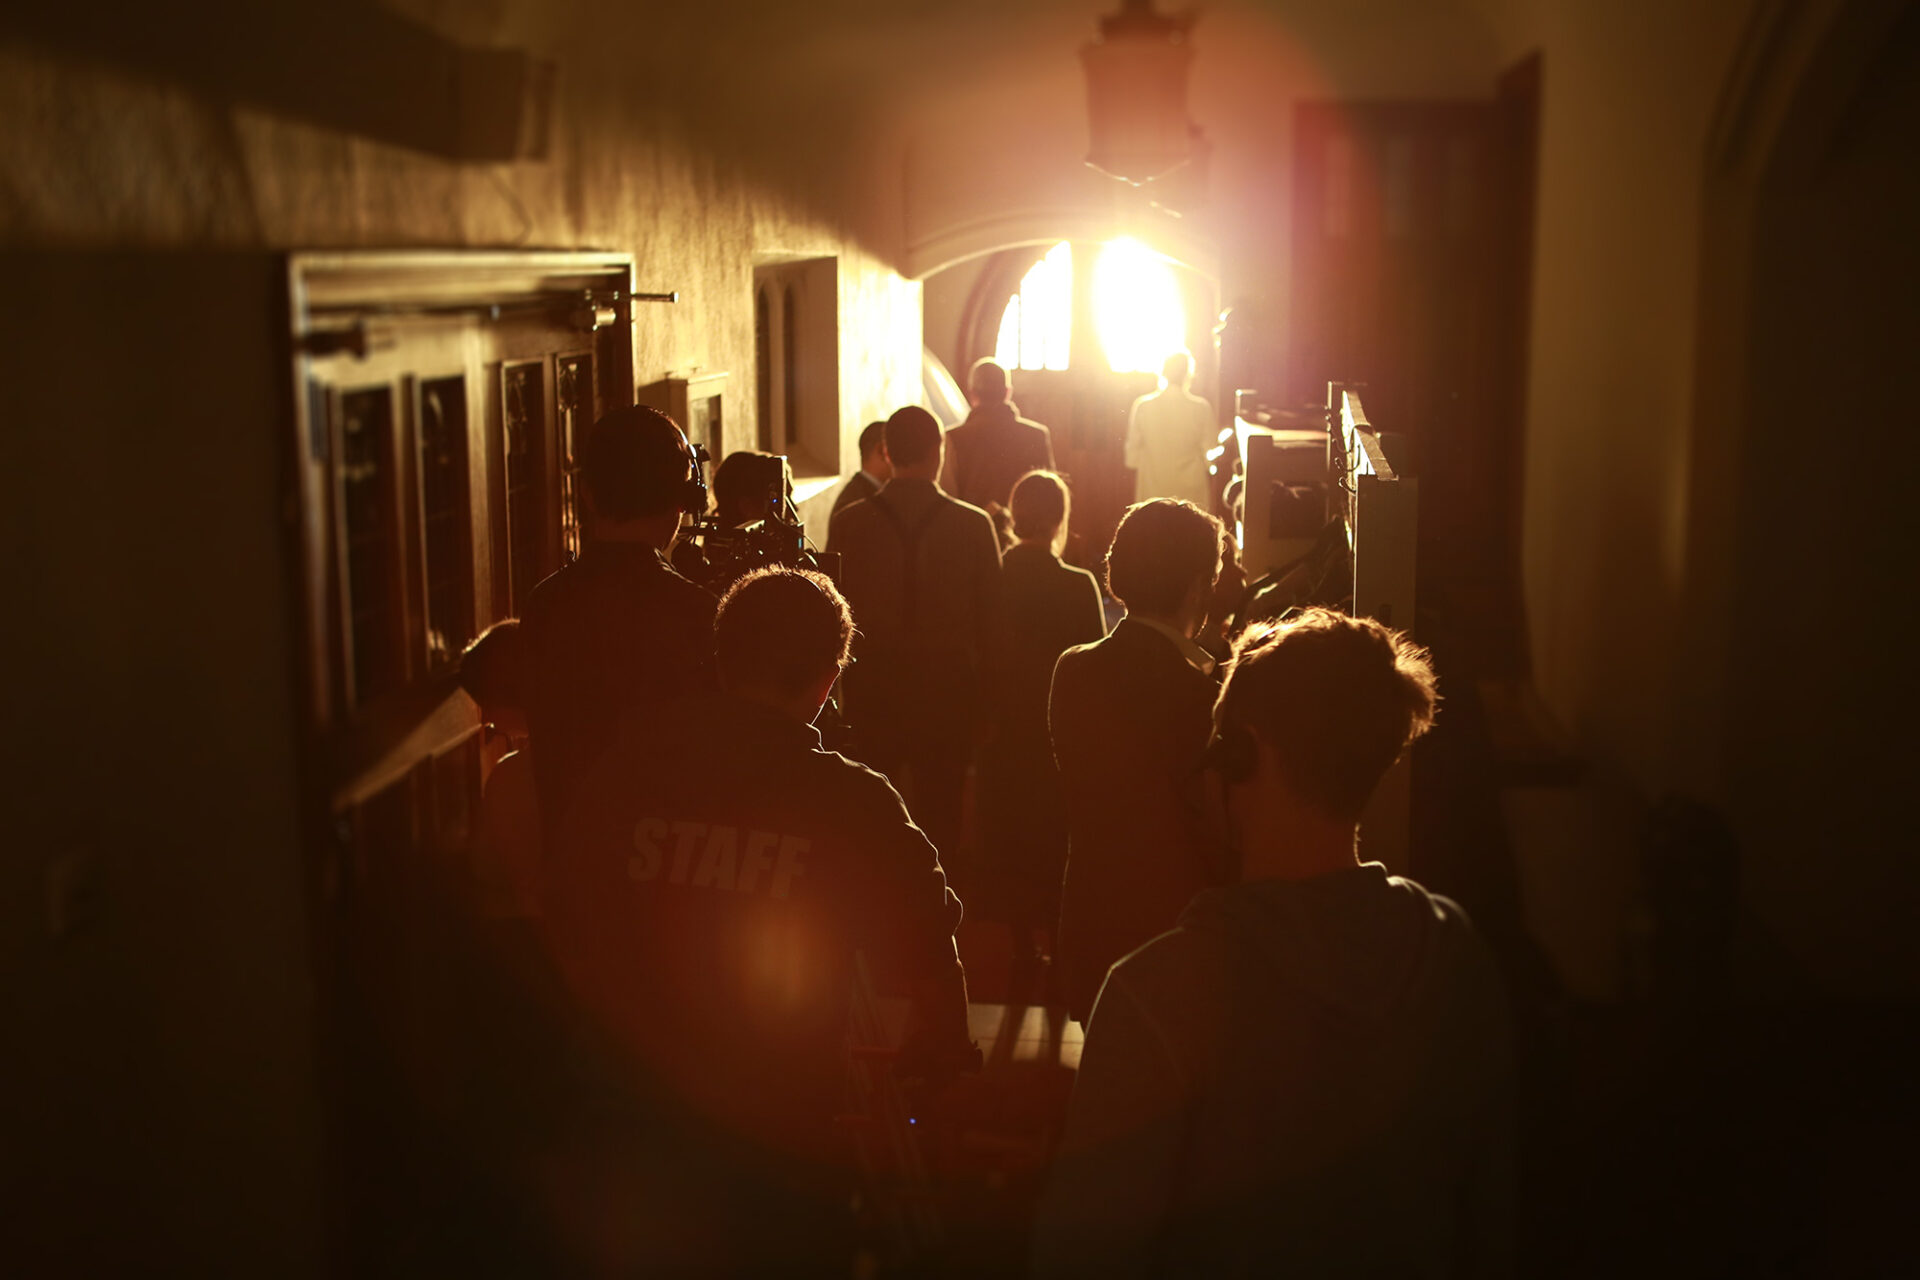 Filming a scene in a sunny hallway